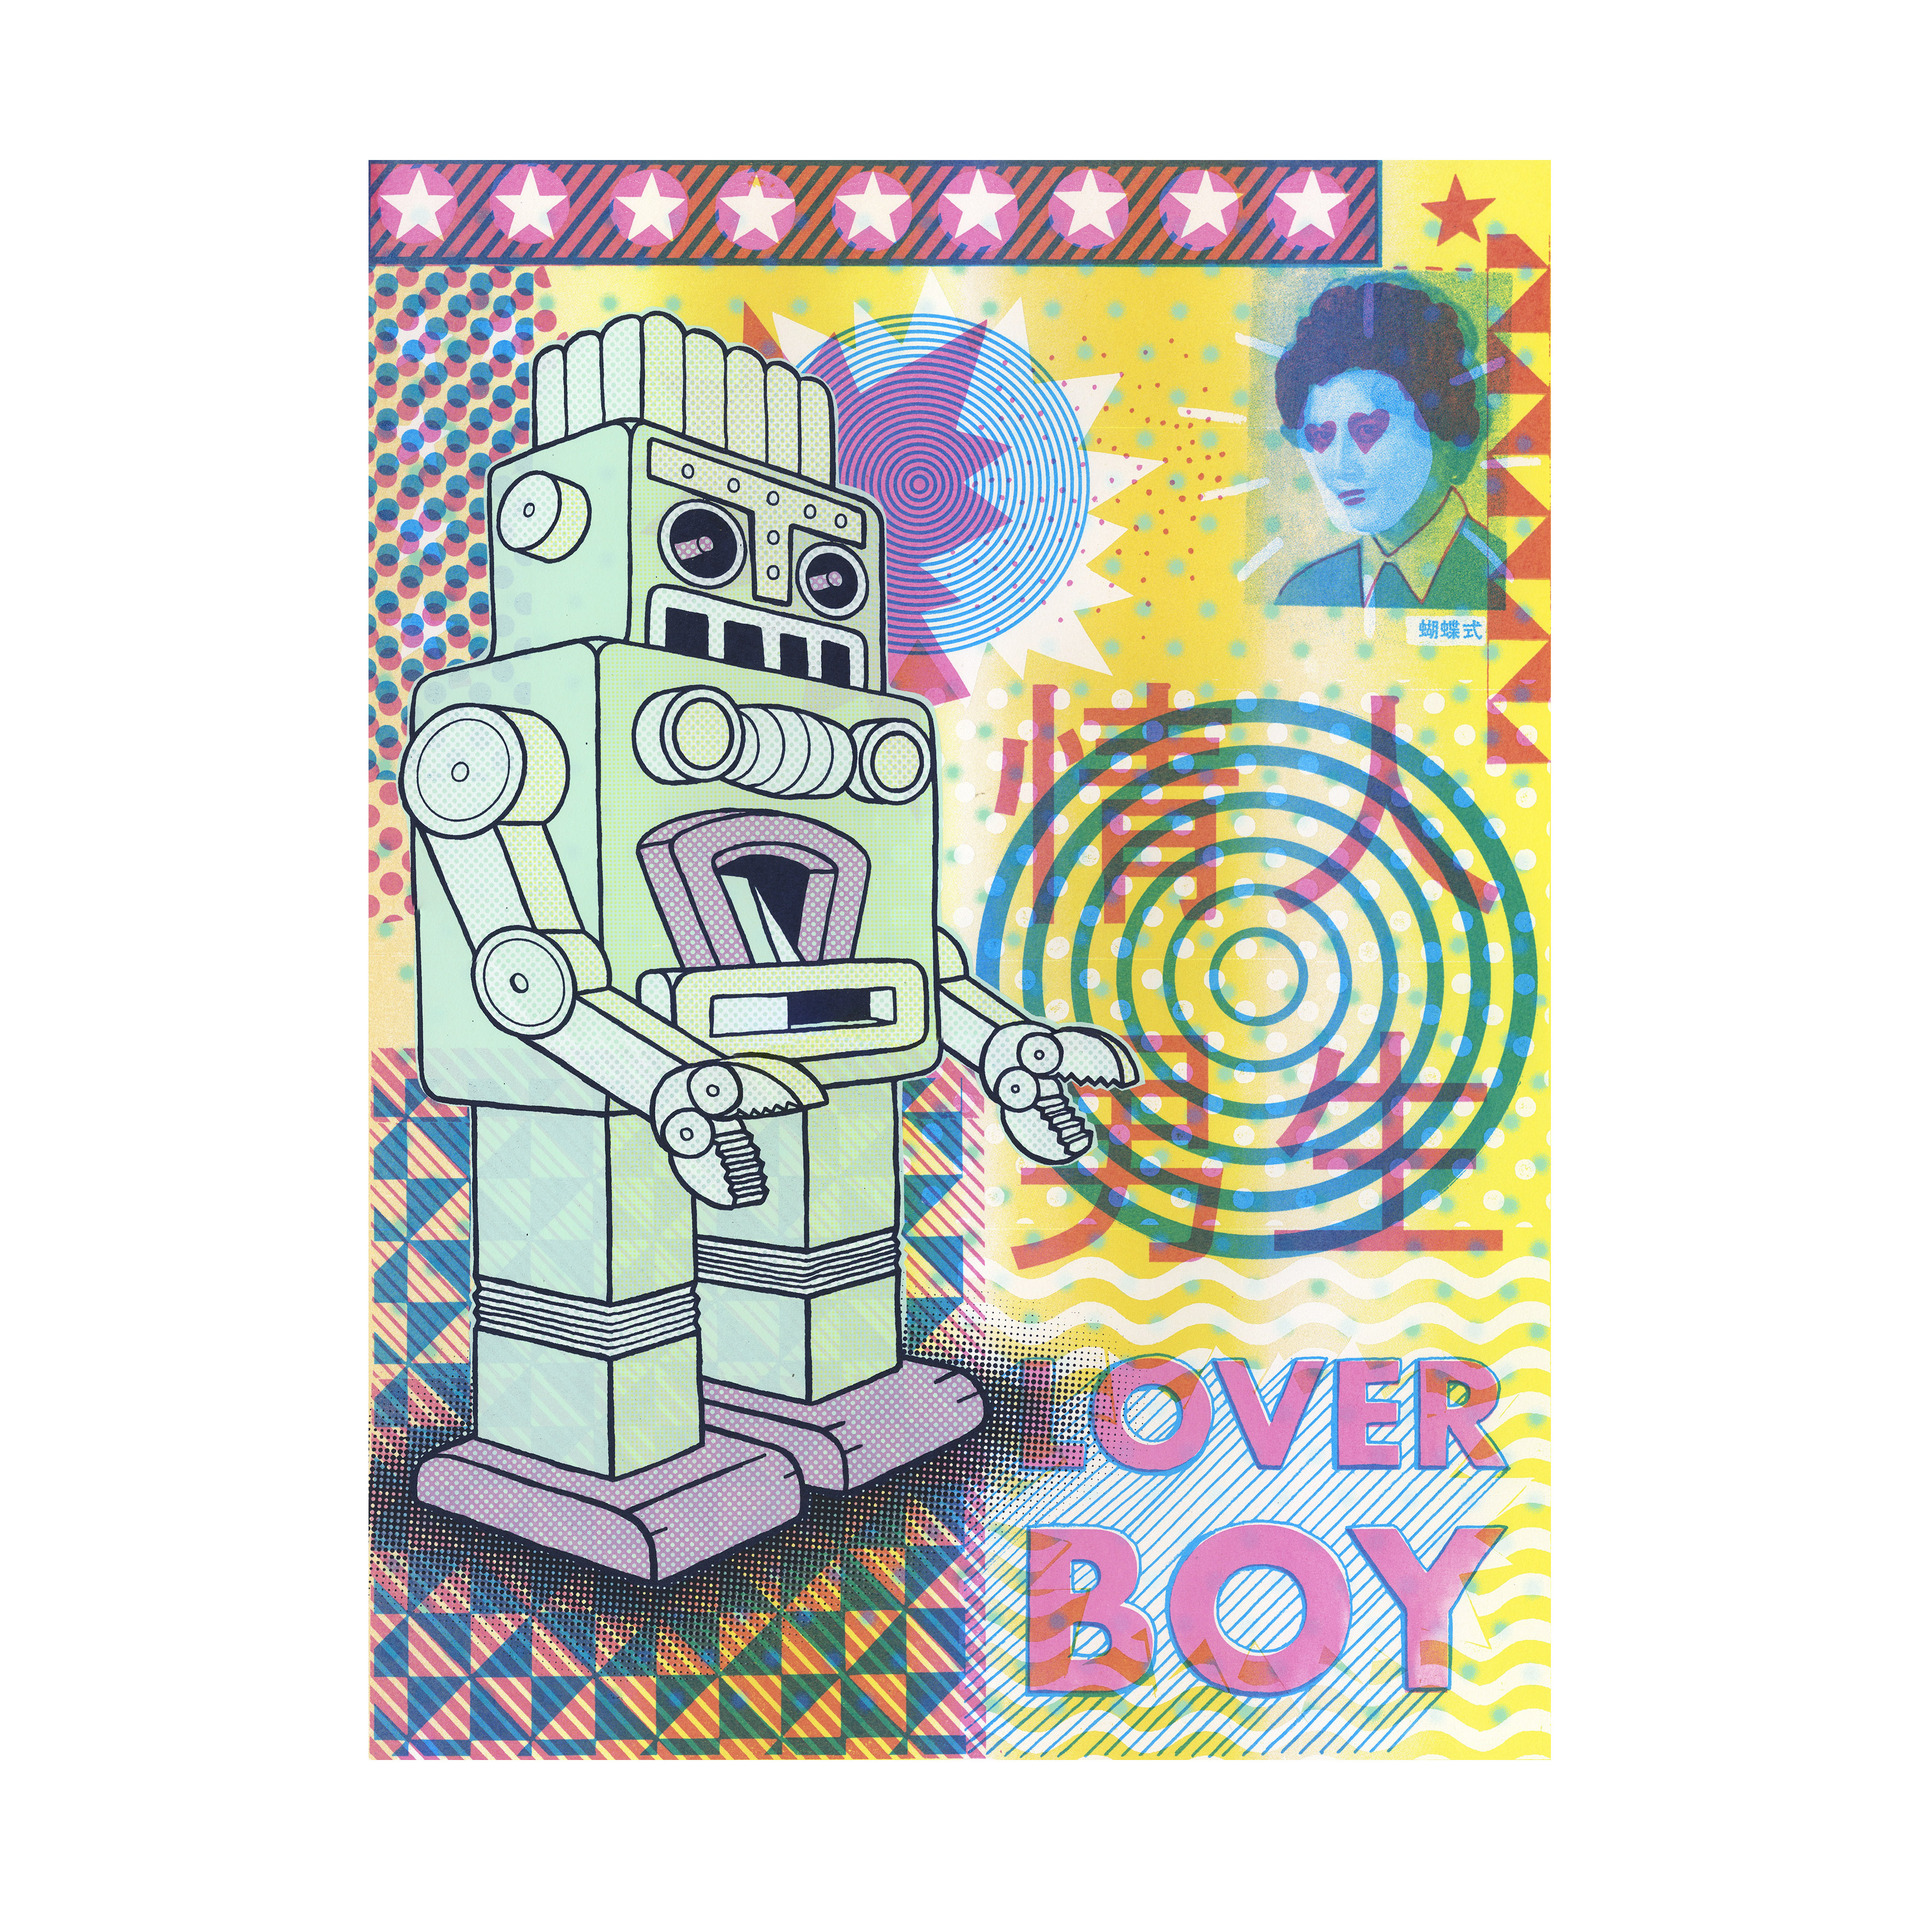 Chadwick Tolley sceenprint, titled Lover Boy, is a collection of images, sketches and textures, the central figure a robot.